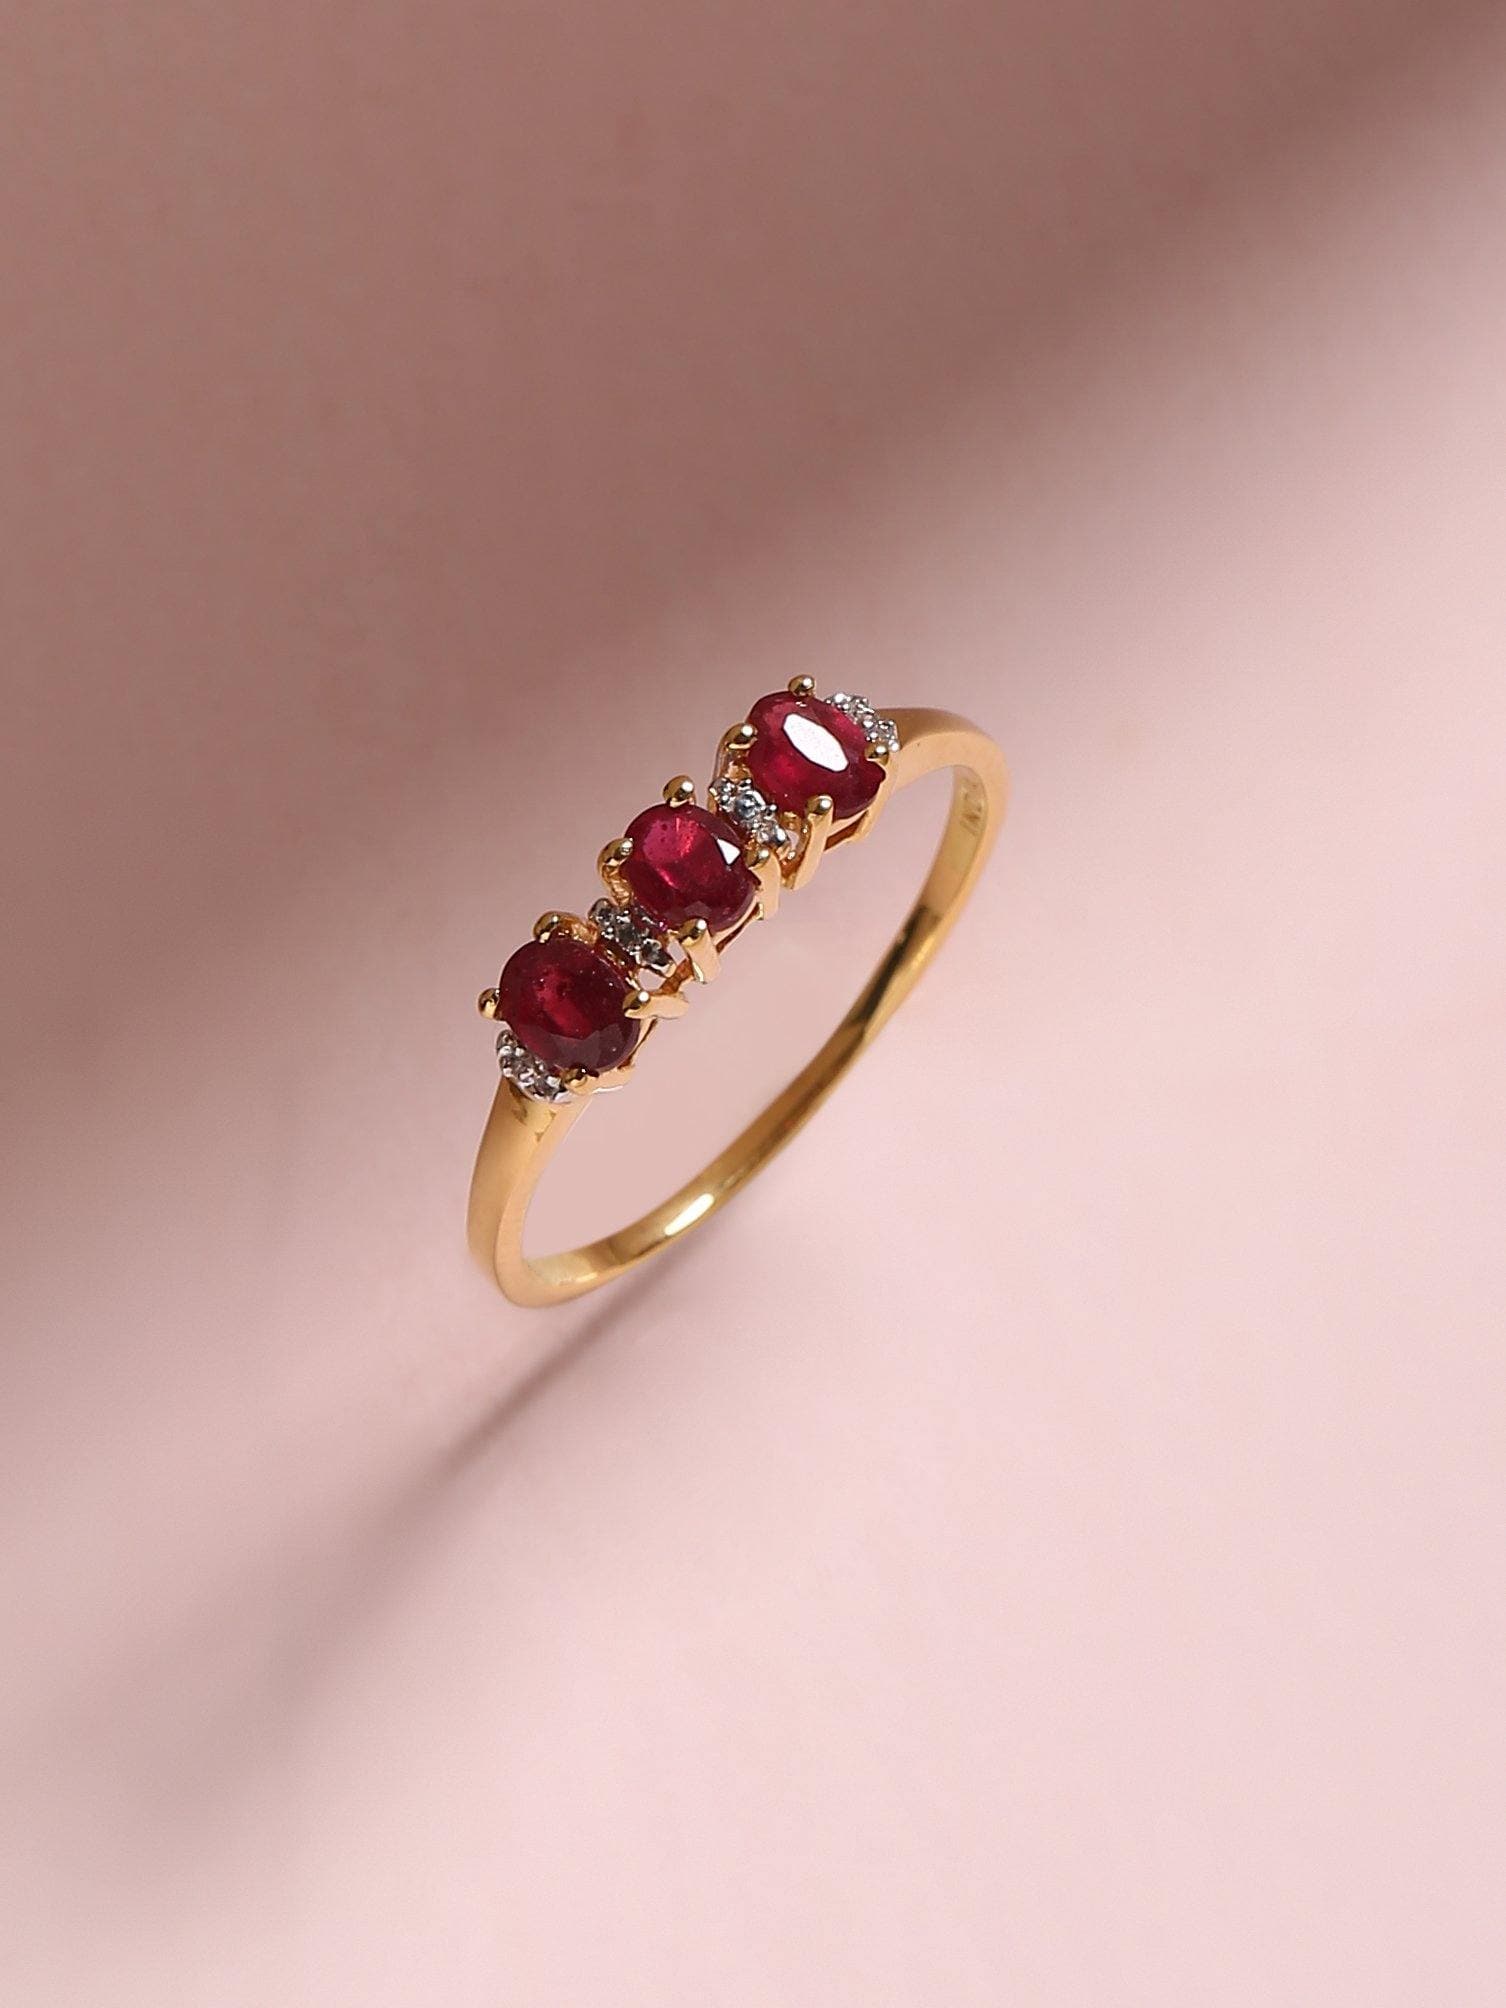 0.46 Ct. Glass Filled Ruby Solid 10k Yellow Gold Ring Jewelry - YoTreasure